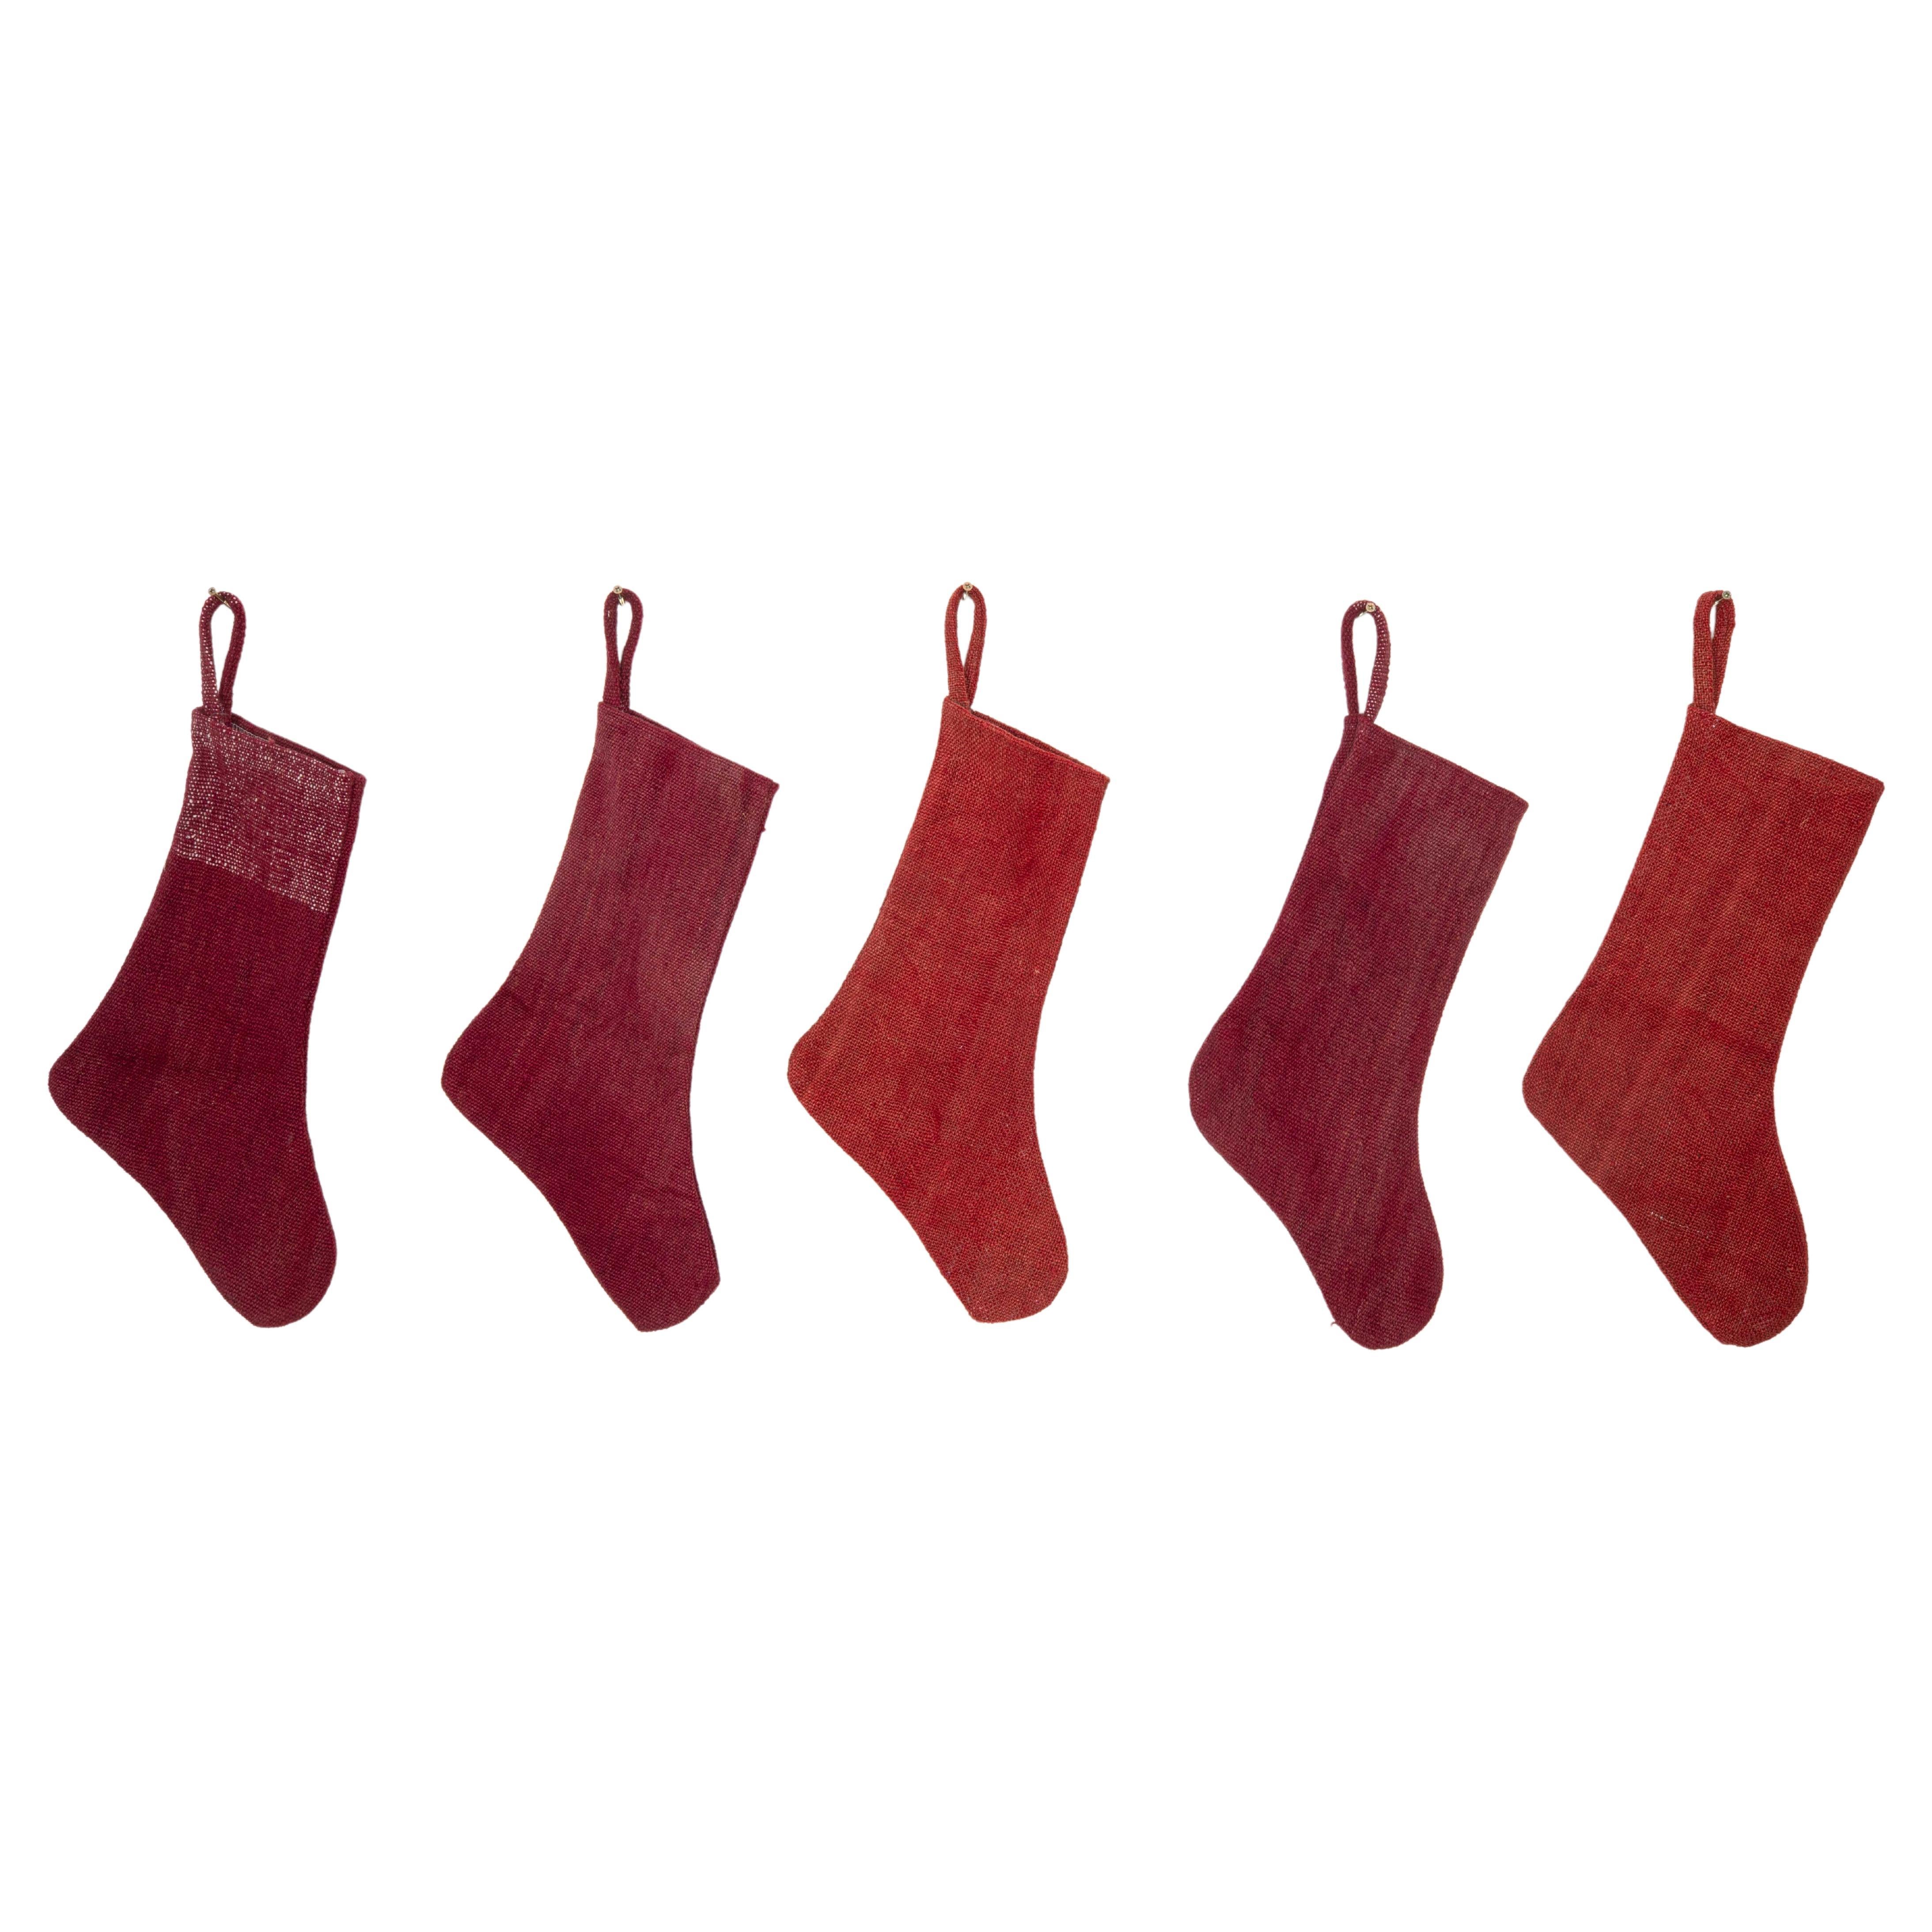 A set of 5 (five) Christmas Stocking Made from Anatolıan Perde Rug Fragments